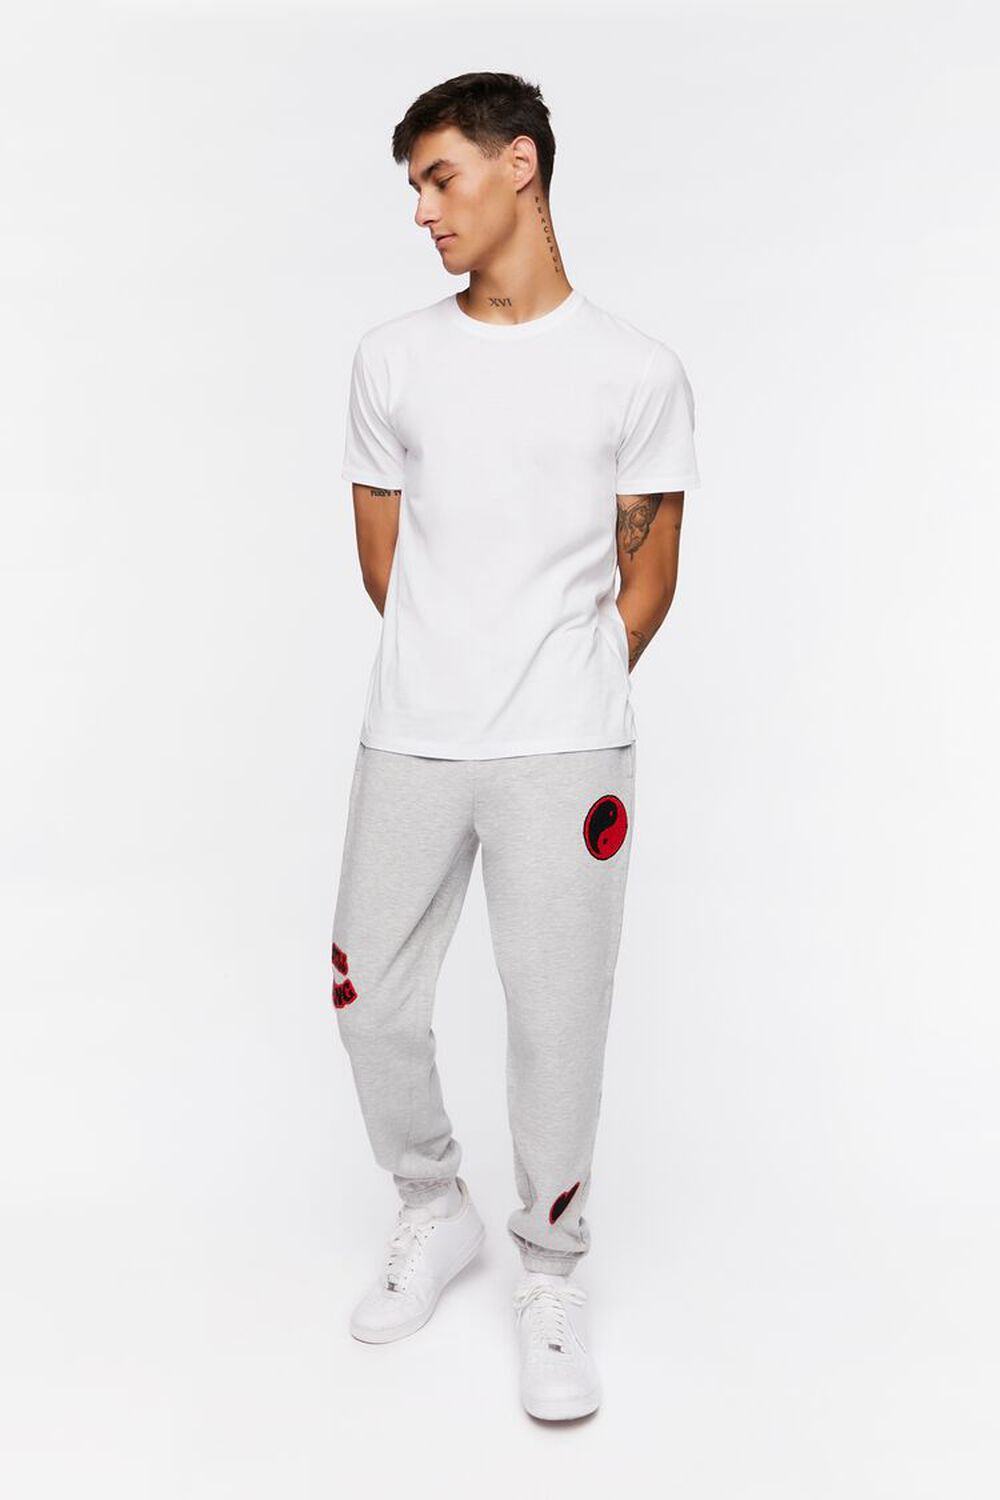 HEATHER GREY/MULTI Fleece Still Going Chenille Patch Joggers, image 1